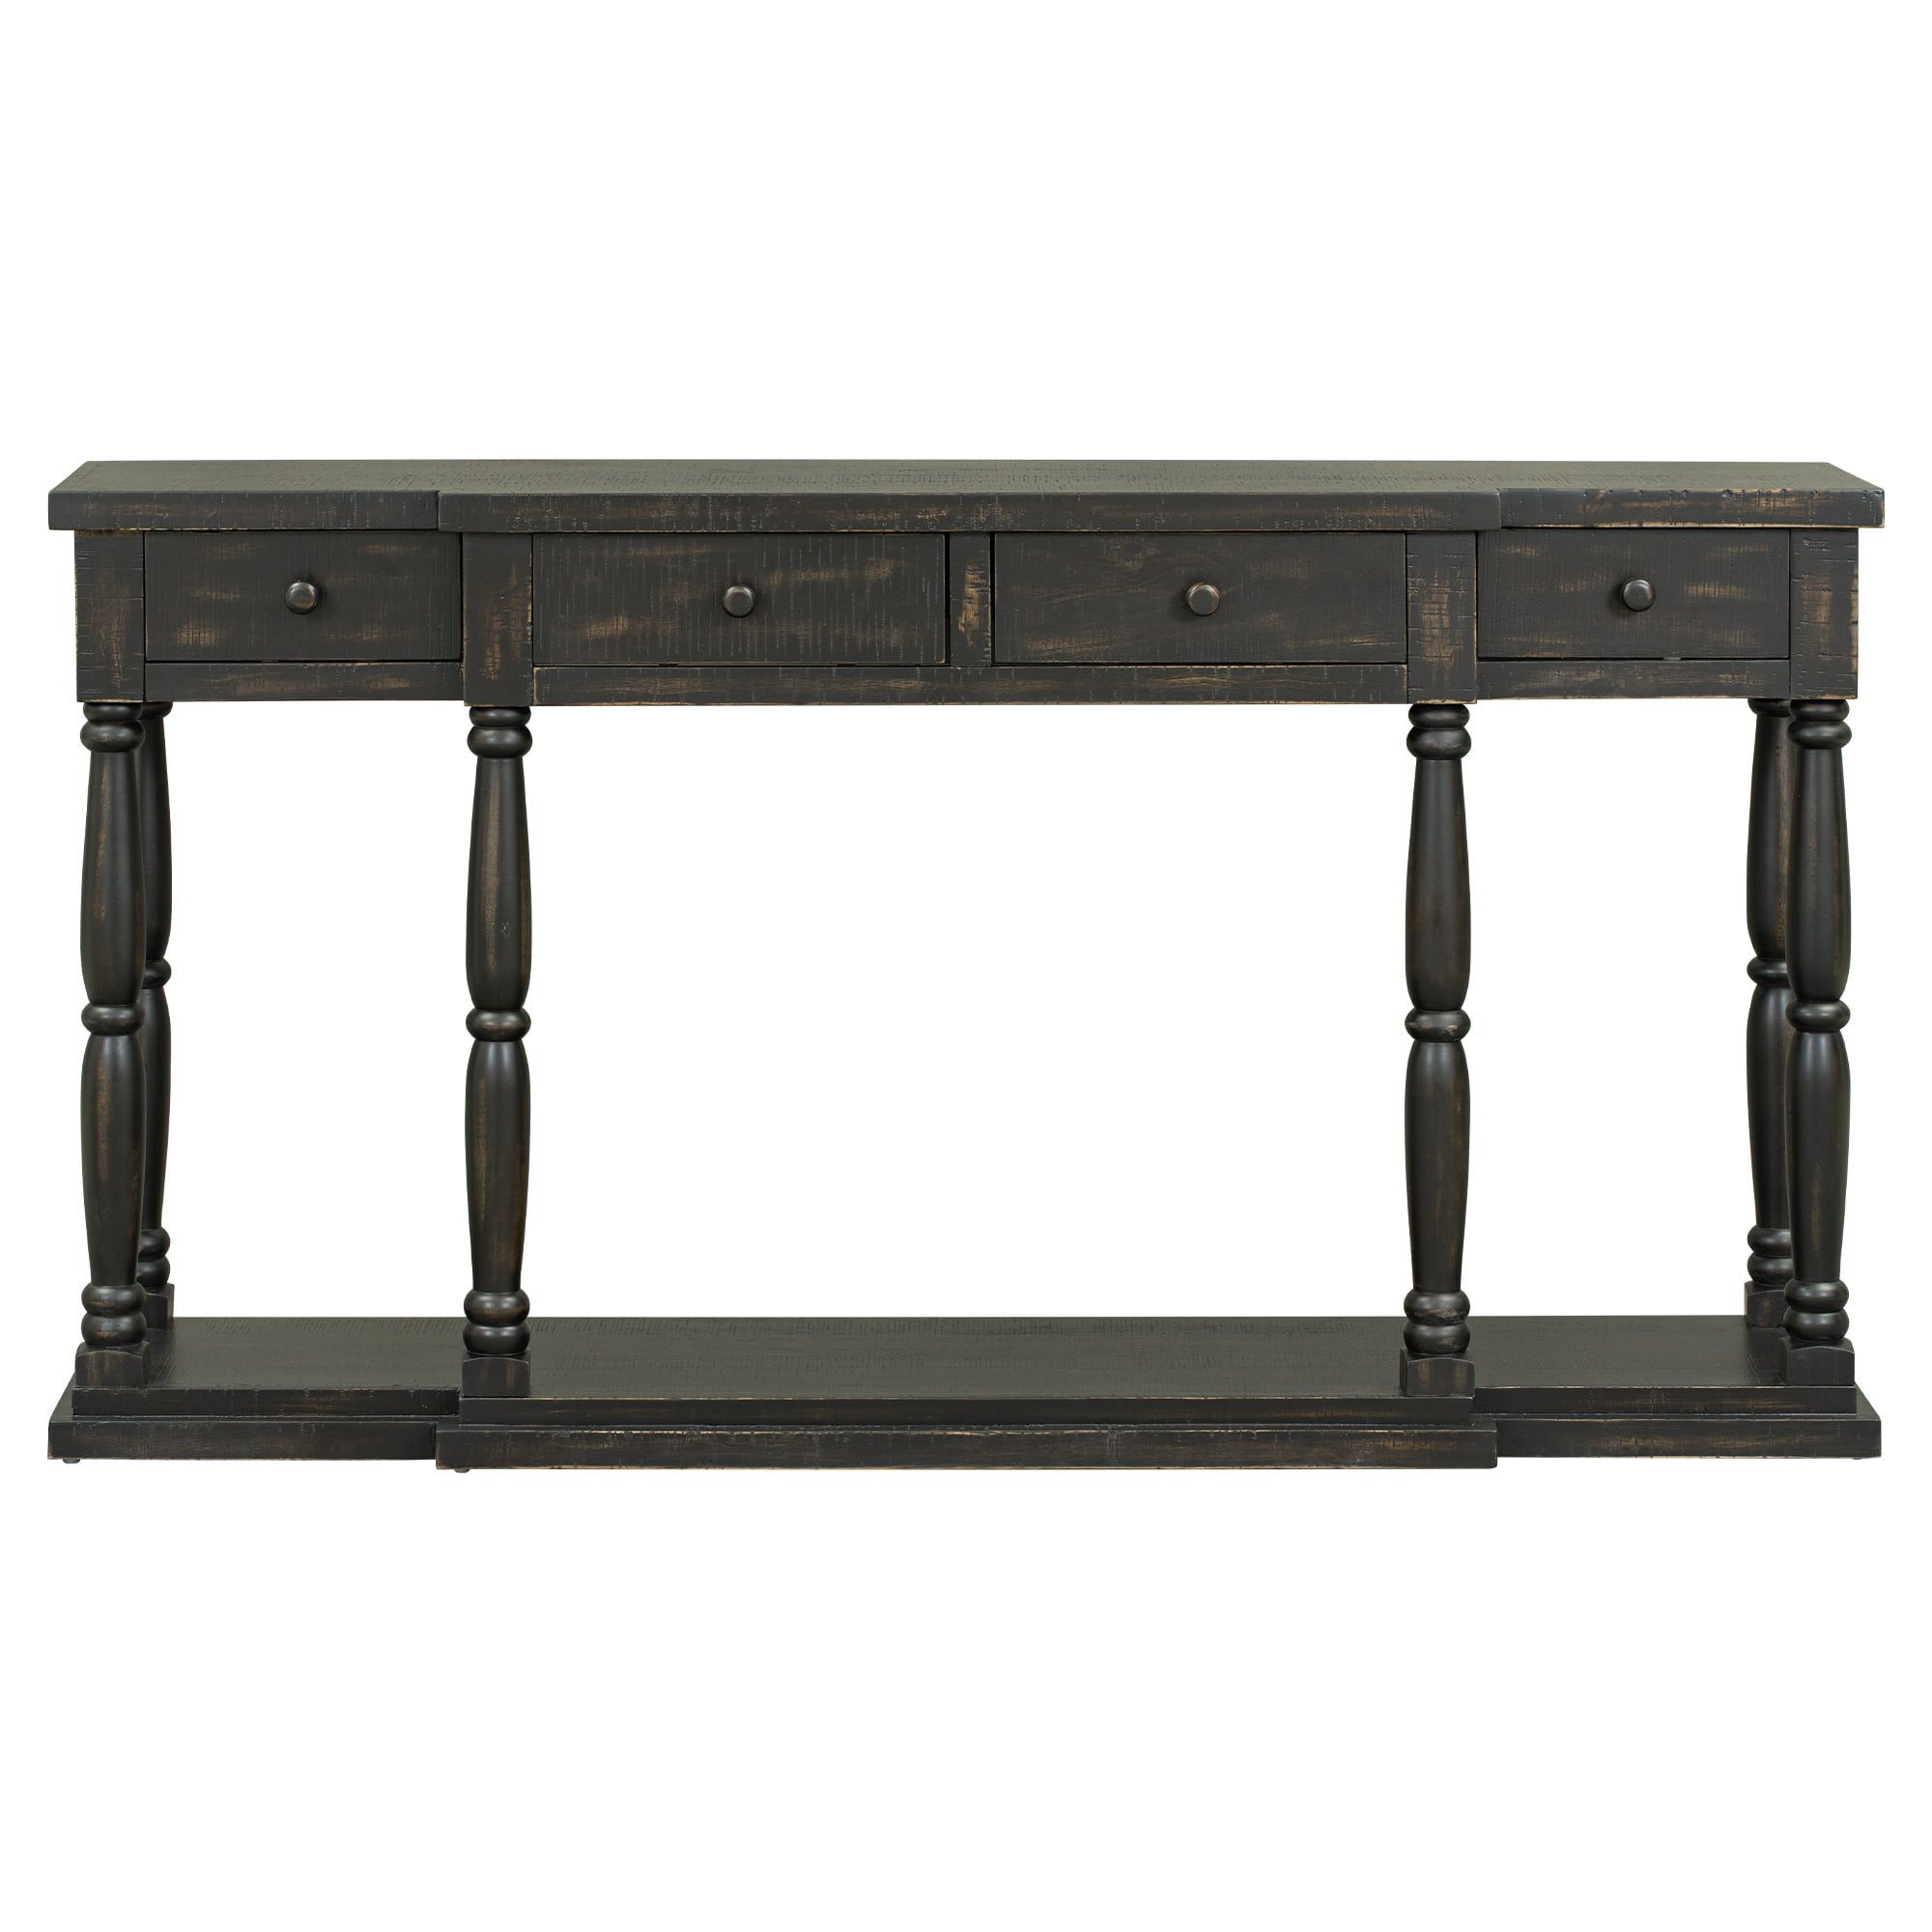 Retro Senior Console Table With 4 Front Facing Storage Drawers And 1 Shelf - WF300175AAB